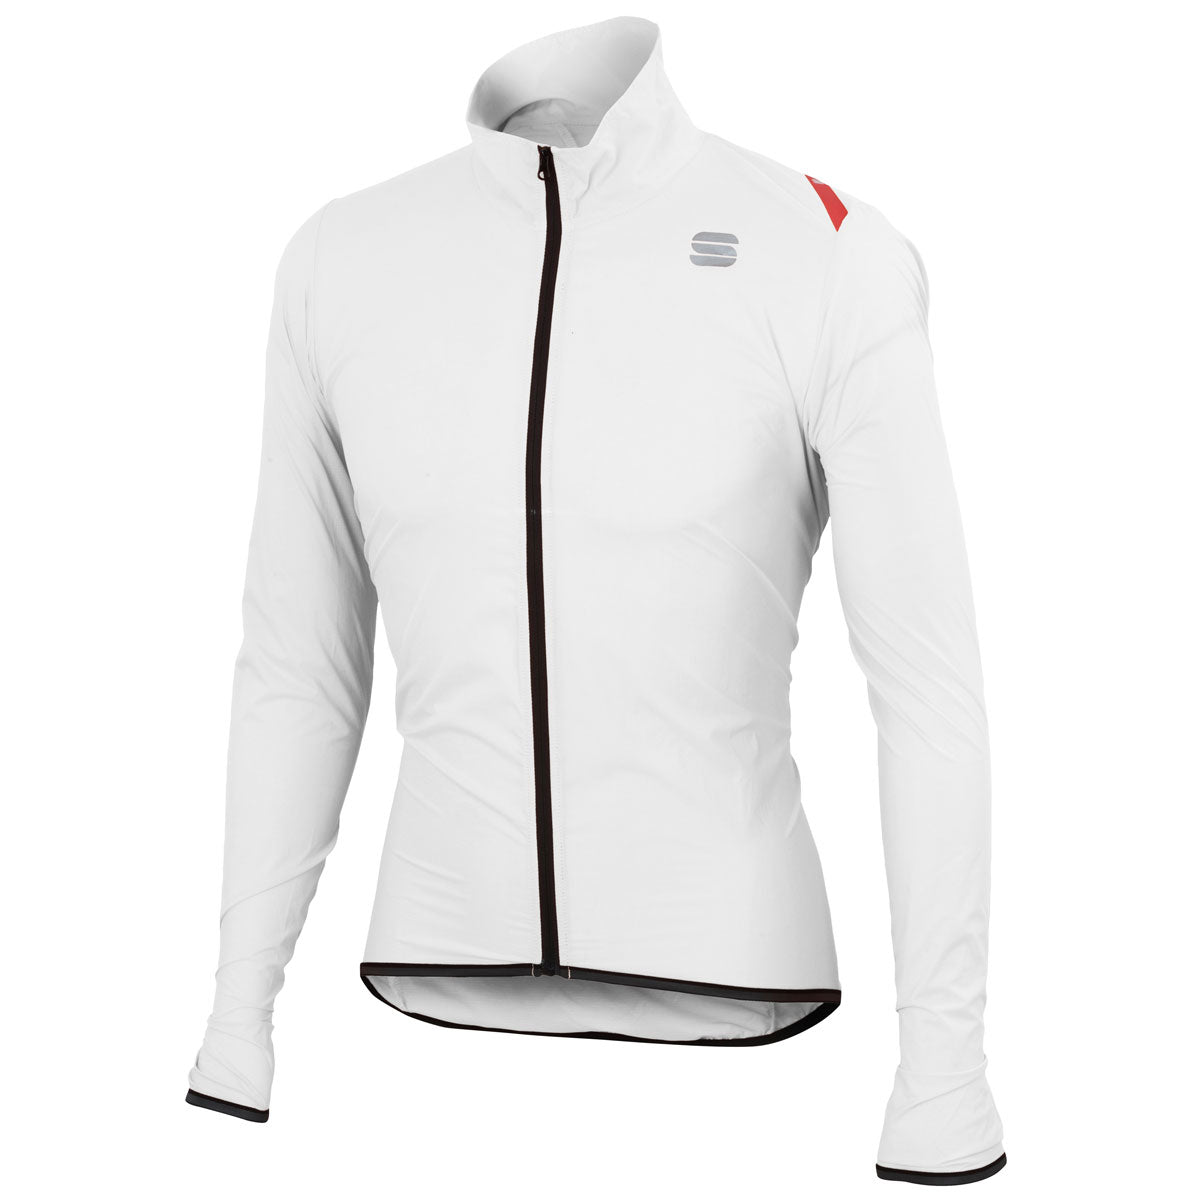 Cortavientos Hot Pack 6 - Blanco | All4cycling